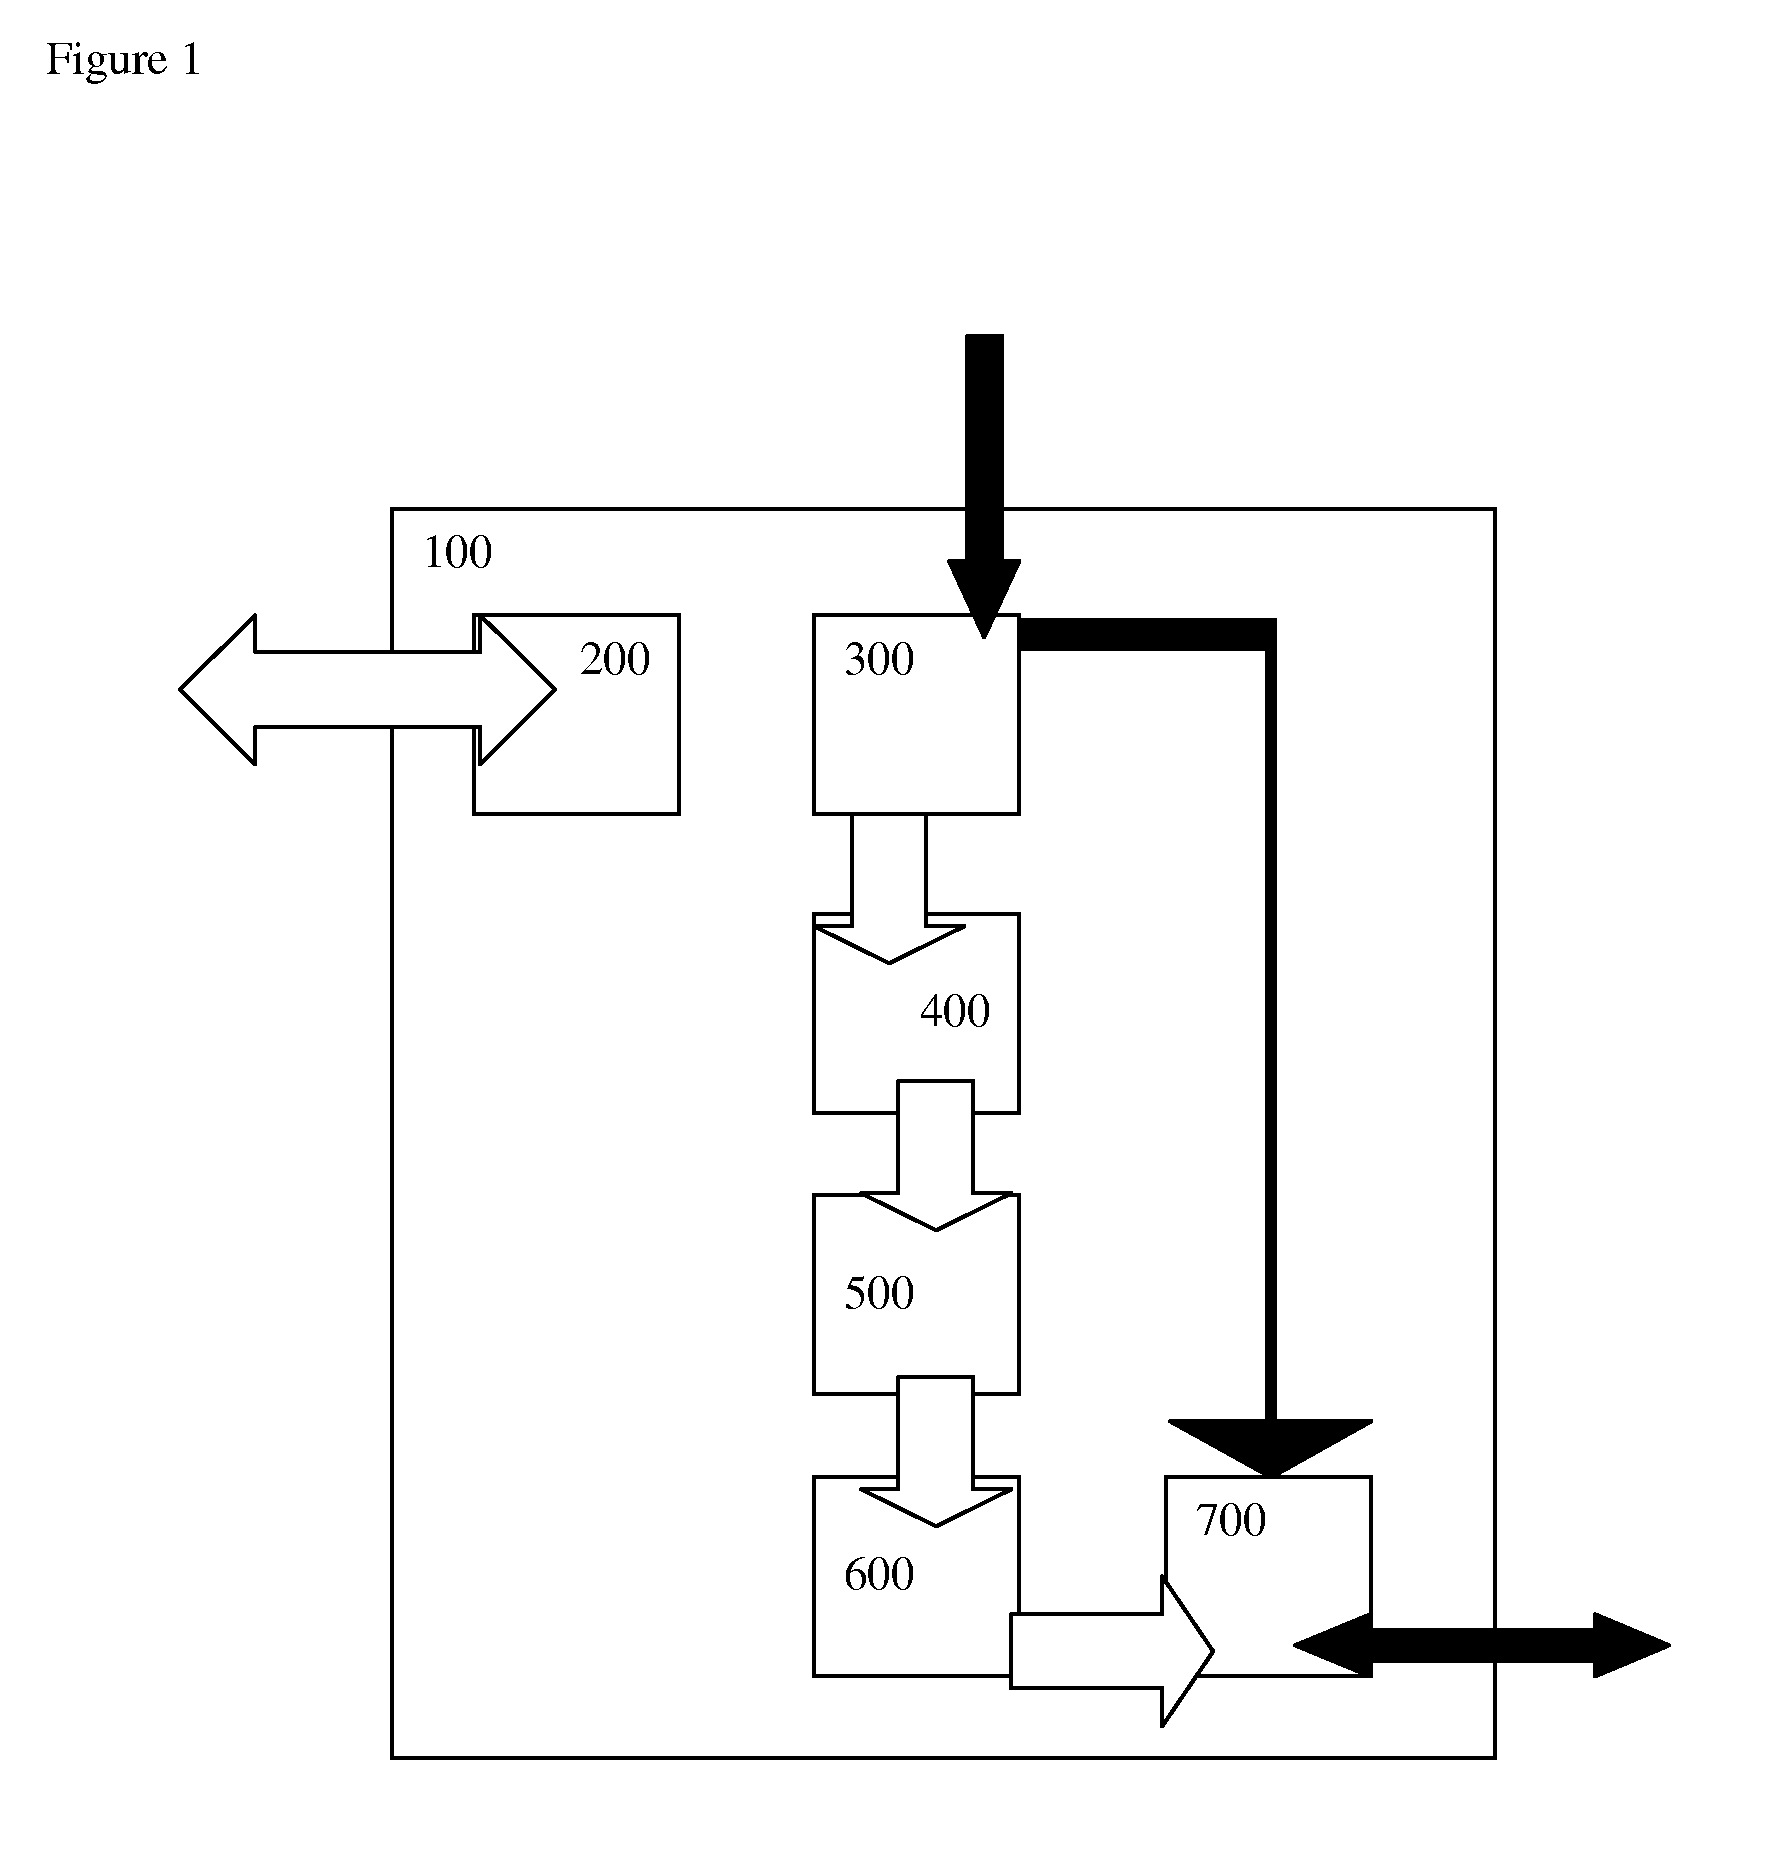 Method for Interacting Via an Internet Accessible Address-Book Using a Visual Interface Phone Device